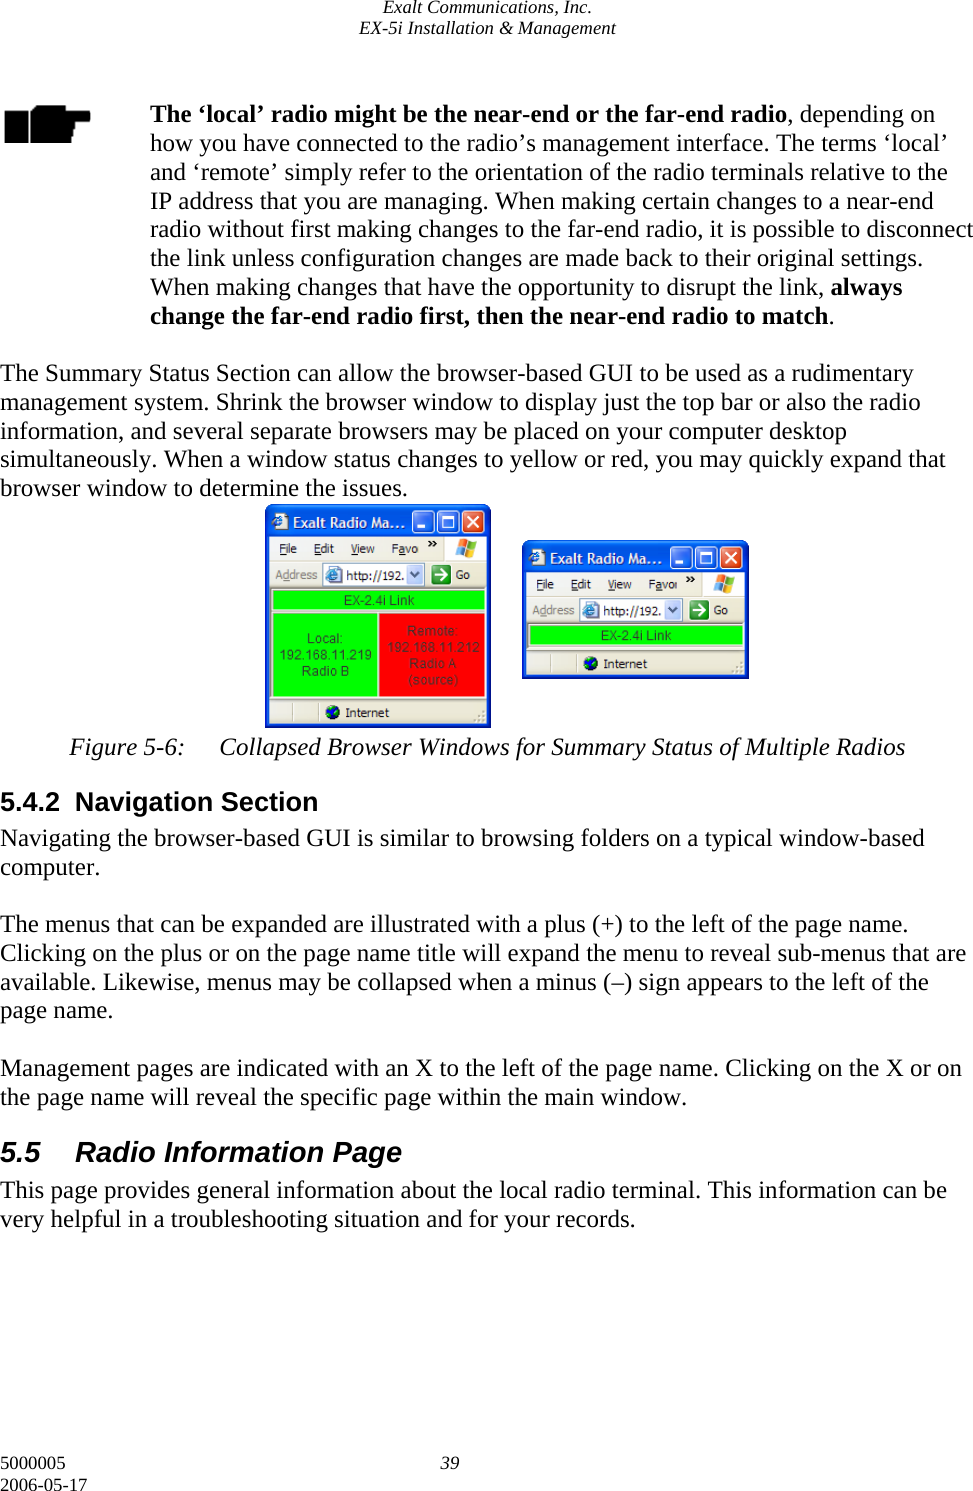 Exalt Communications, Inc. EX-5i Installation &amp; Management 5000005  39 2006-05-17  The ‘local’ radio might be the near-end or the far-end radio, depending on how you have connected to the radio’s management interface. The terms ‘local’ and ‘remote’ simply refer to the orientation of the radio terminals relative to the IP address that you are managing. When making certain changes to a near-end radio without first making changes to the far-end radio, it is possible to disconnect the link unless configuration changes are made back to their original settings. When making changes that have the opportunity to disrupt the link, always change the far-end radio first, then the near-end radio to match.  The Summary Status Section can allow the browser-based GUI to be used as a rudimentary management system. Shrink the browser window to display just the top bar or also the radio information, and several separate browsers may be placed on your computer desktop simultaneously. When a window status changes to yellow or red, you may quickly expand that browser window to determine the issues.         Figure 5-6:  Collapsed Browser Windows for Summary Status of Multiple Radios 5.4.2 Navigation Section Navigating the browser-based GUI is similar to browsing folders on a typical window-based computer.  The menus that can be expanded are illustrated with a plus (+) to the left of the page name. Clicking on the plus or on the page name title will expand the menu to reveal sub-menus that are available. Likewise, menus may be collapsed when a minus (–) sign appears to the left of the page name.  Management pages are indicated with an X to the left of the page name. Clicking on the X or on the page name will reveal the specific page within the main window. 5.5  Radio Information Page This page provides general information about the local radio terminal. This information can be very helpful in a troubleshooting situation and for your records.        